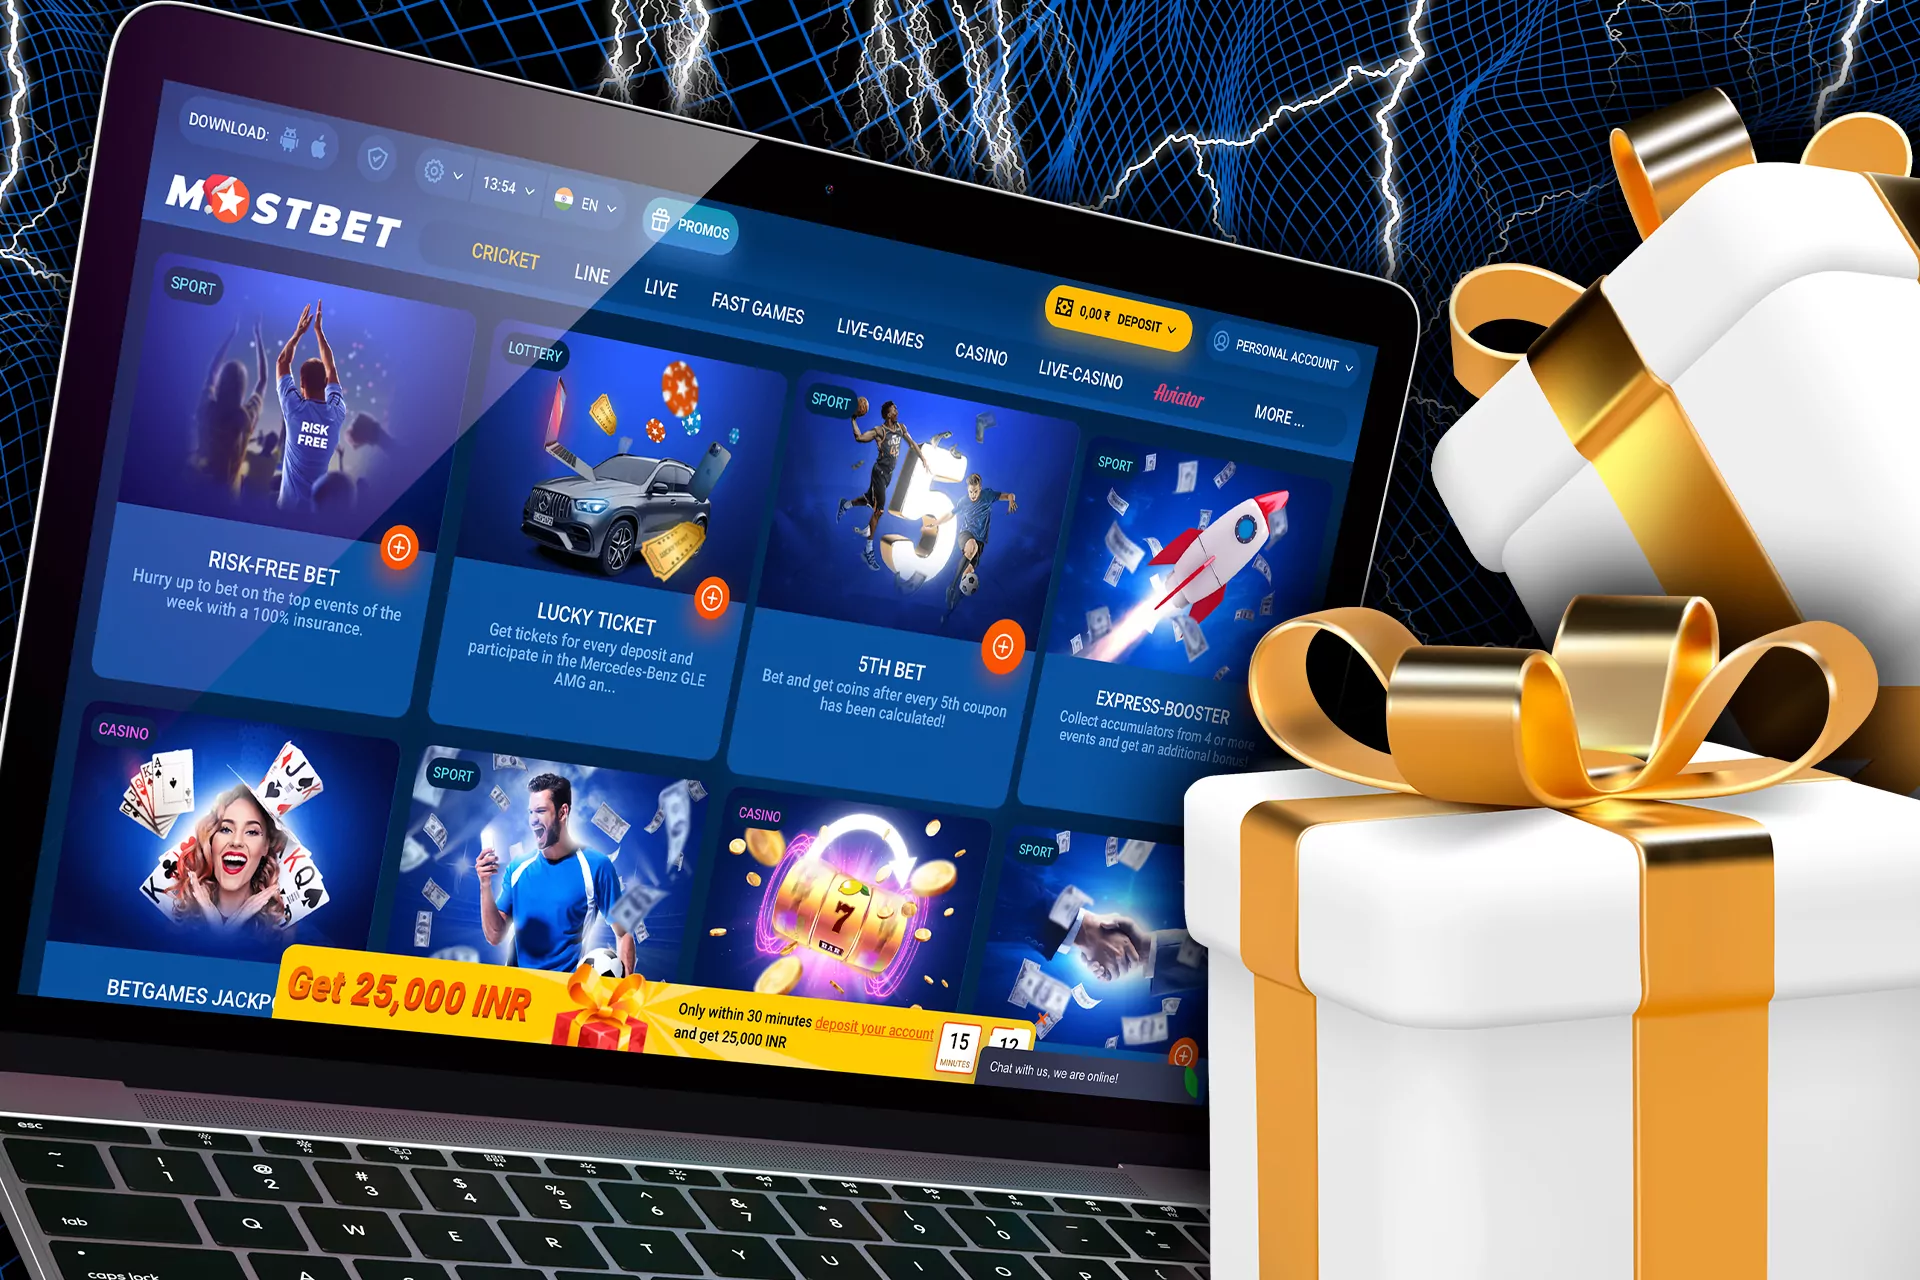 Check out the other types of bonuses and loyalty programs at Mostbet for Indian players.